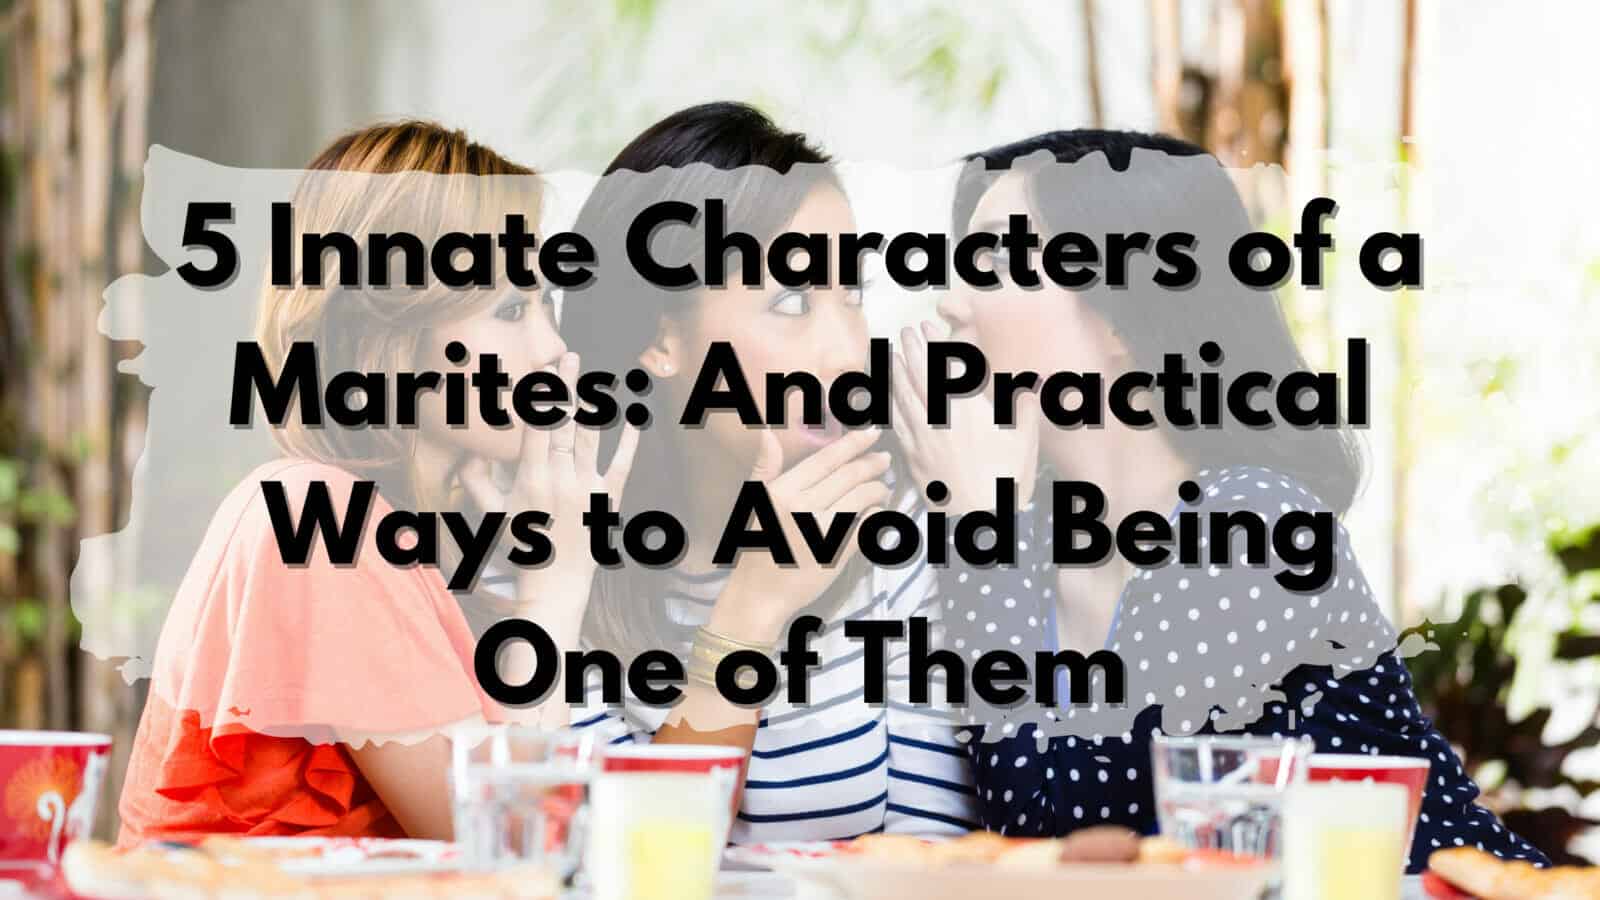 5 Intimate Characteristics of Marriages: And Practical Ways to Avoid Being One